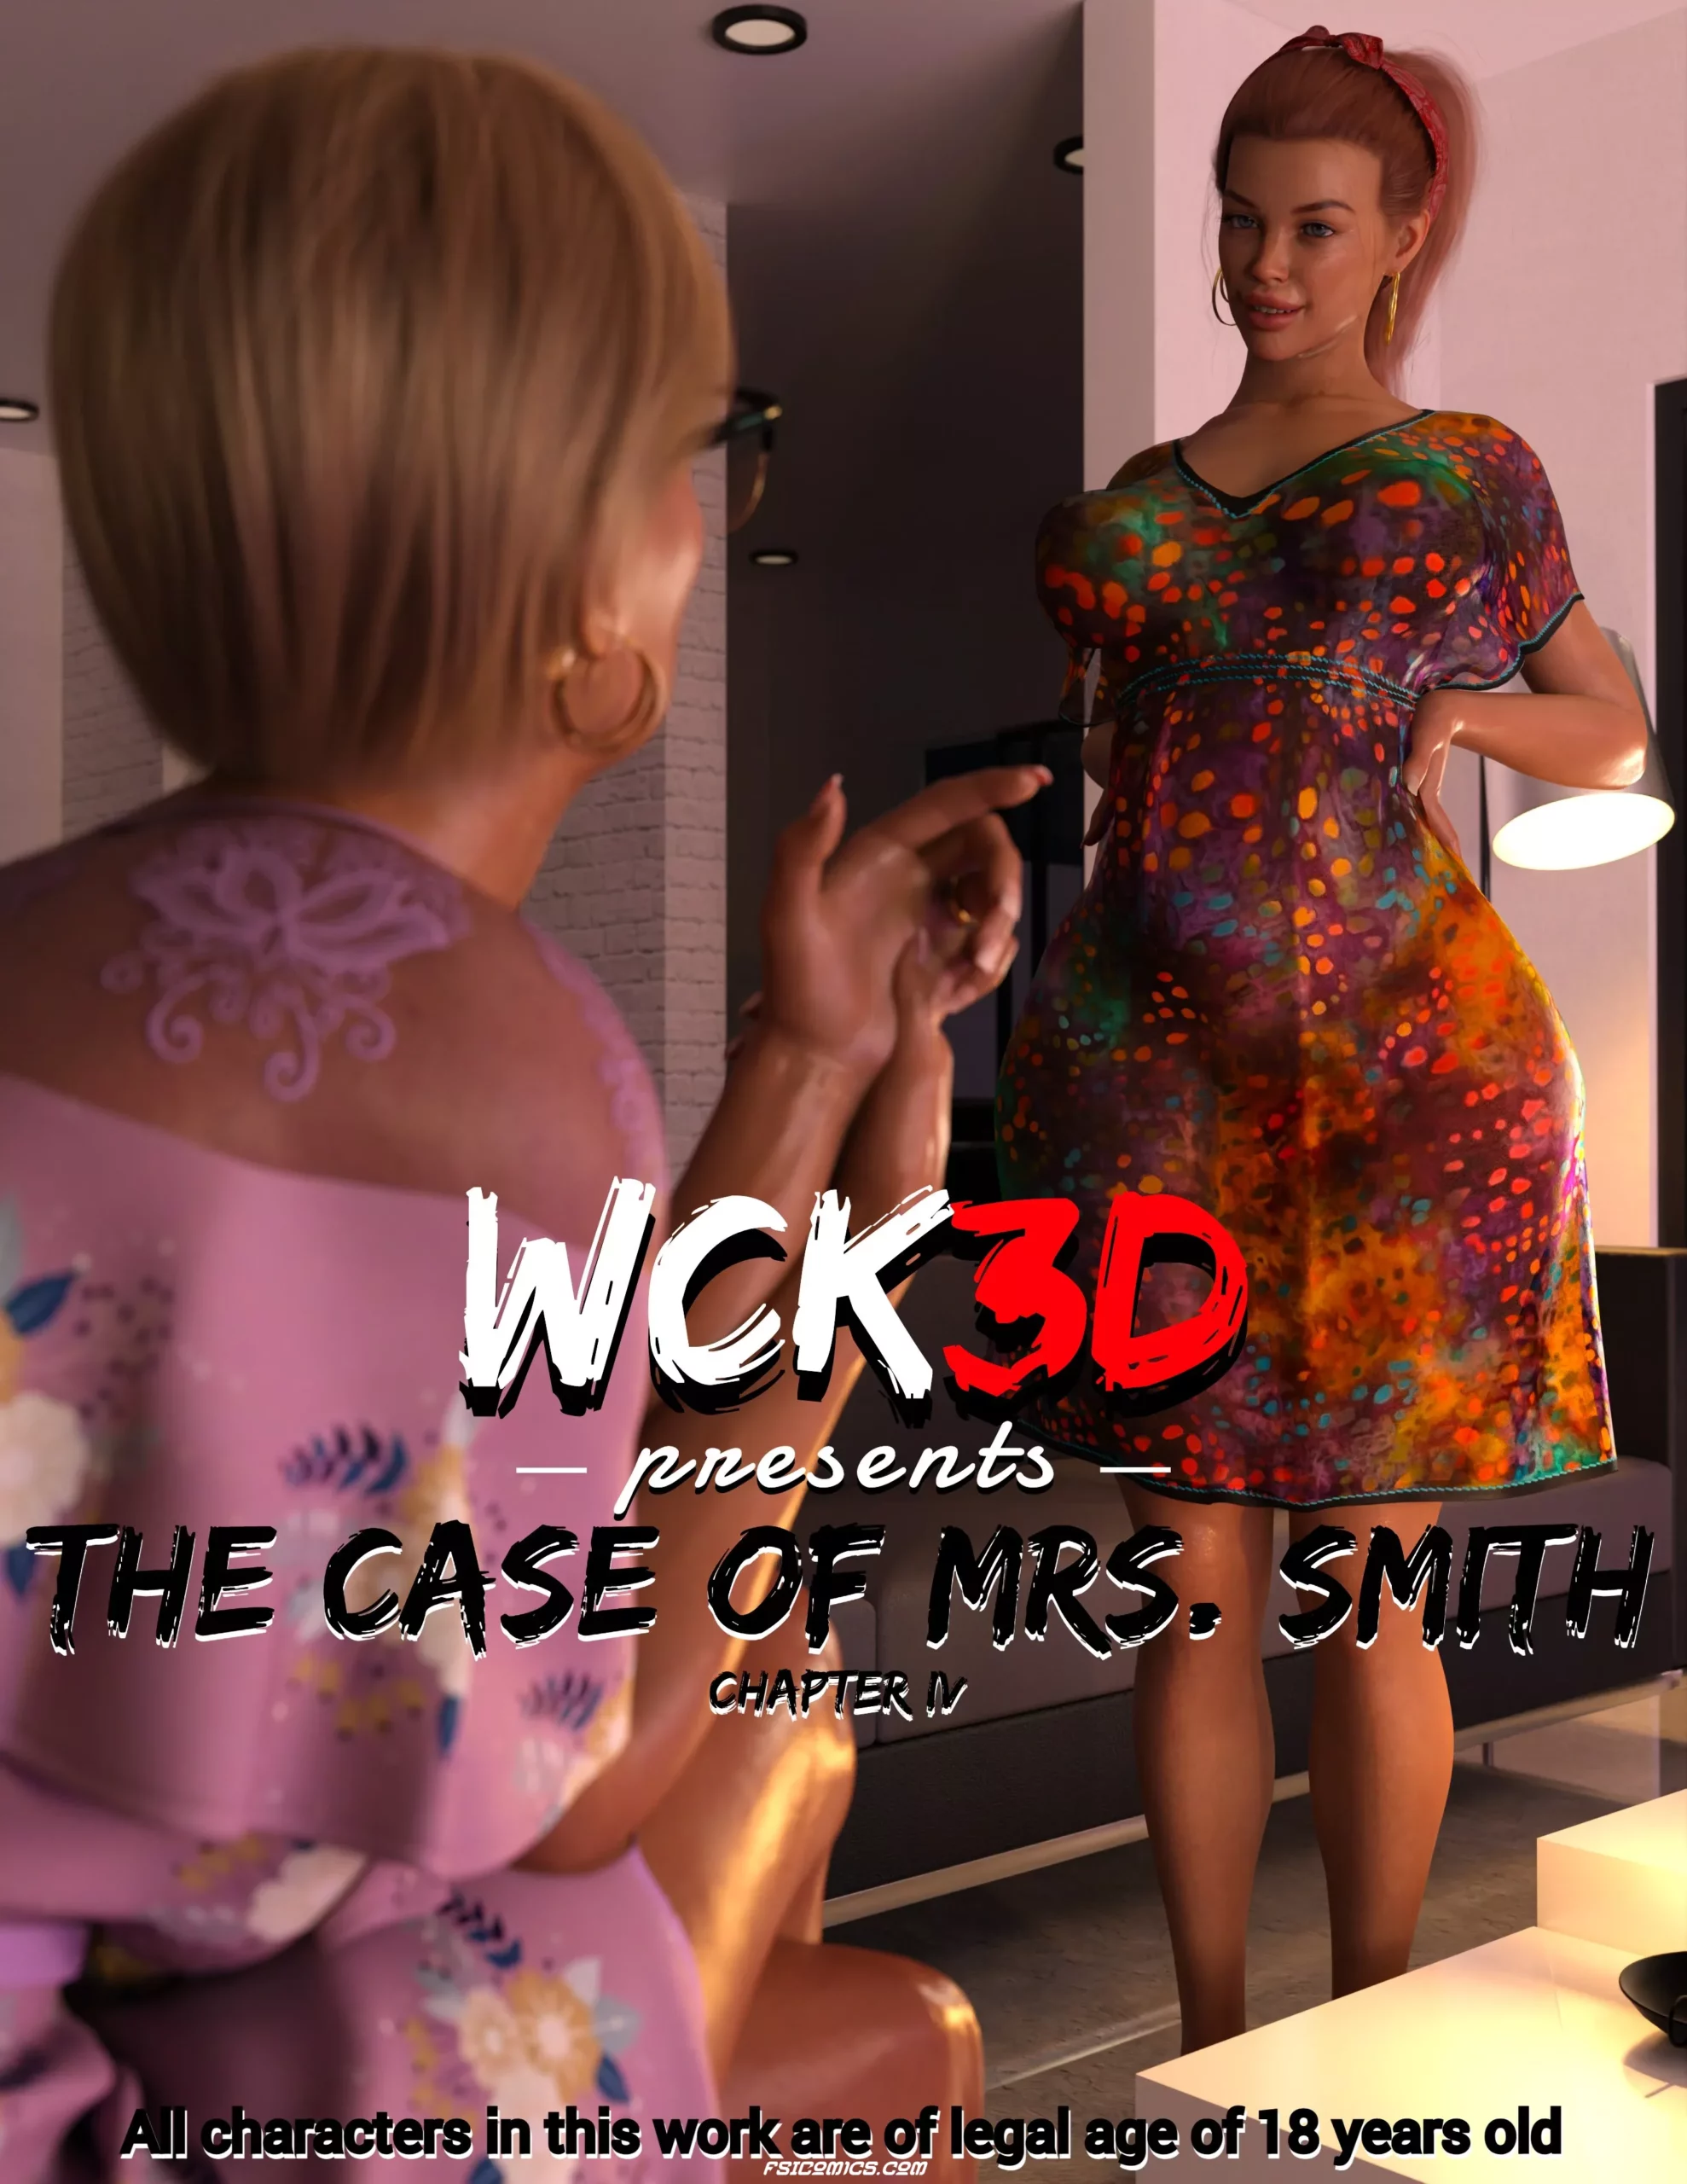 The Case Of Mrs Smith Chapter 4 - WCK3D - 315 - FSIComics